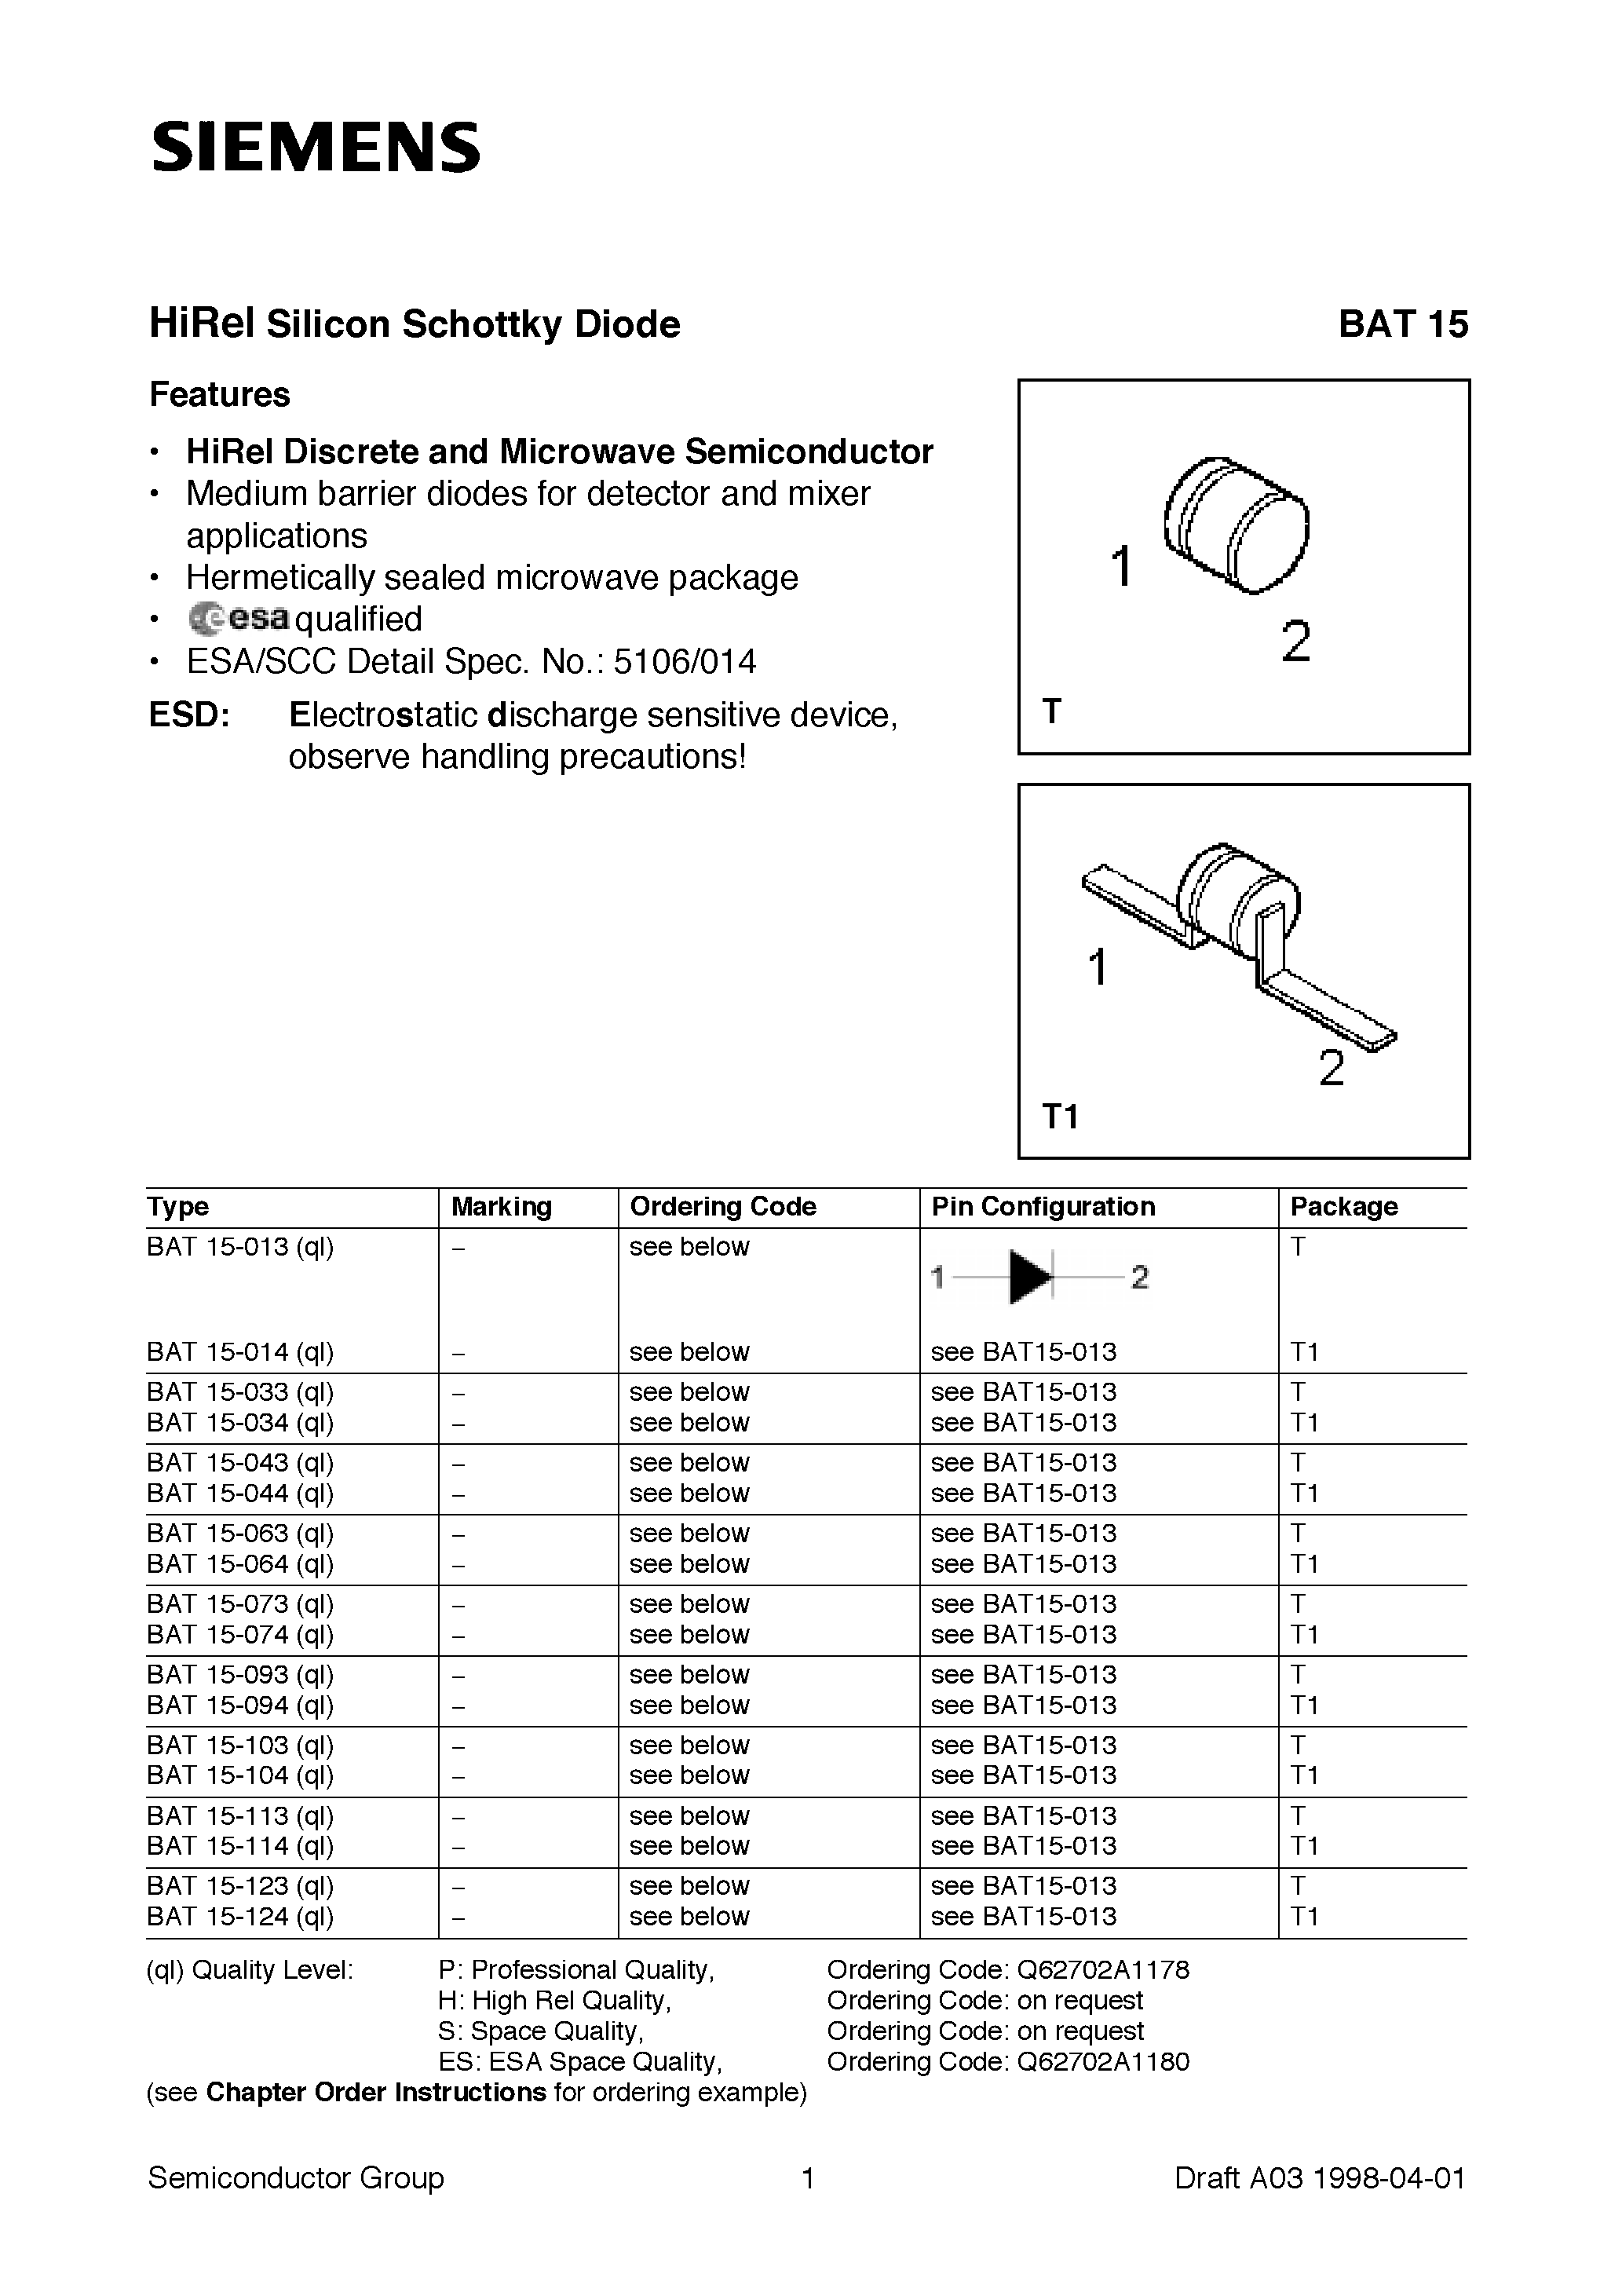 Datasheet BAT15 - HiRel Silicon Schottky Diode (HiRel Discrete and Microwave Semiconductor Medium barrier diodes for detector and mixer applications) page 1